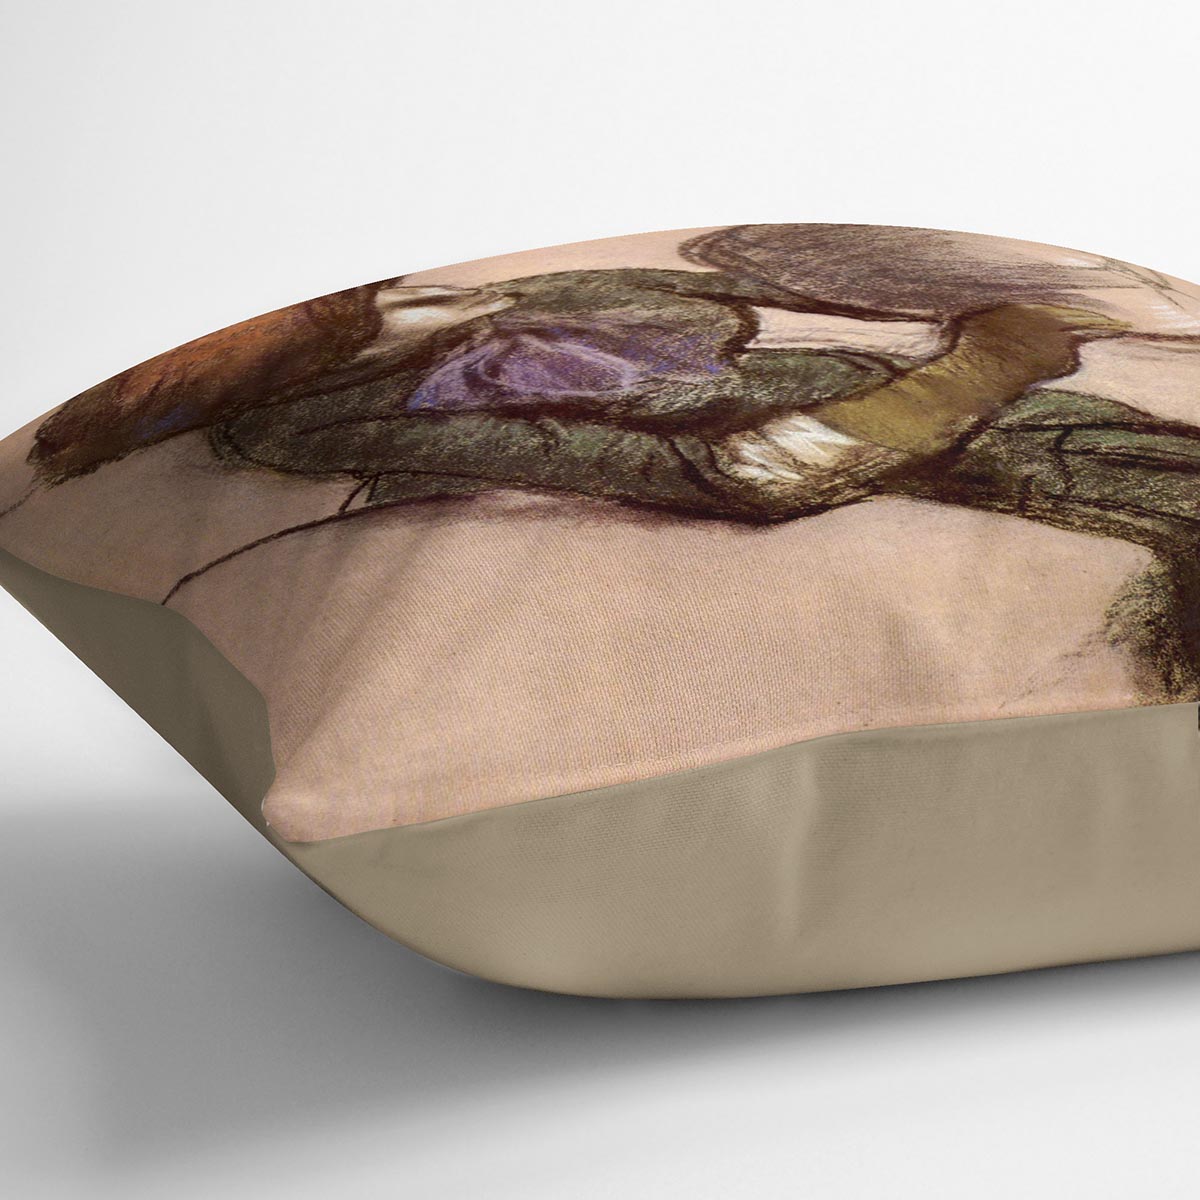 The milliner 2 by Degas Cushion